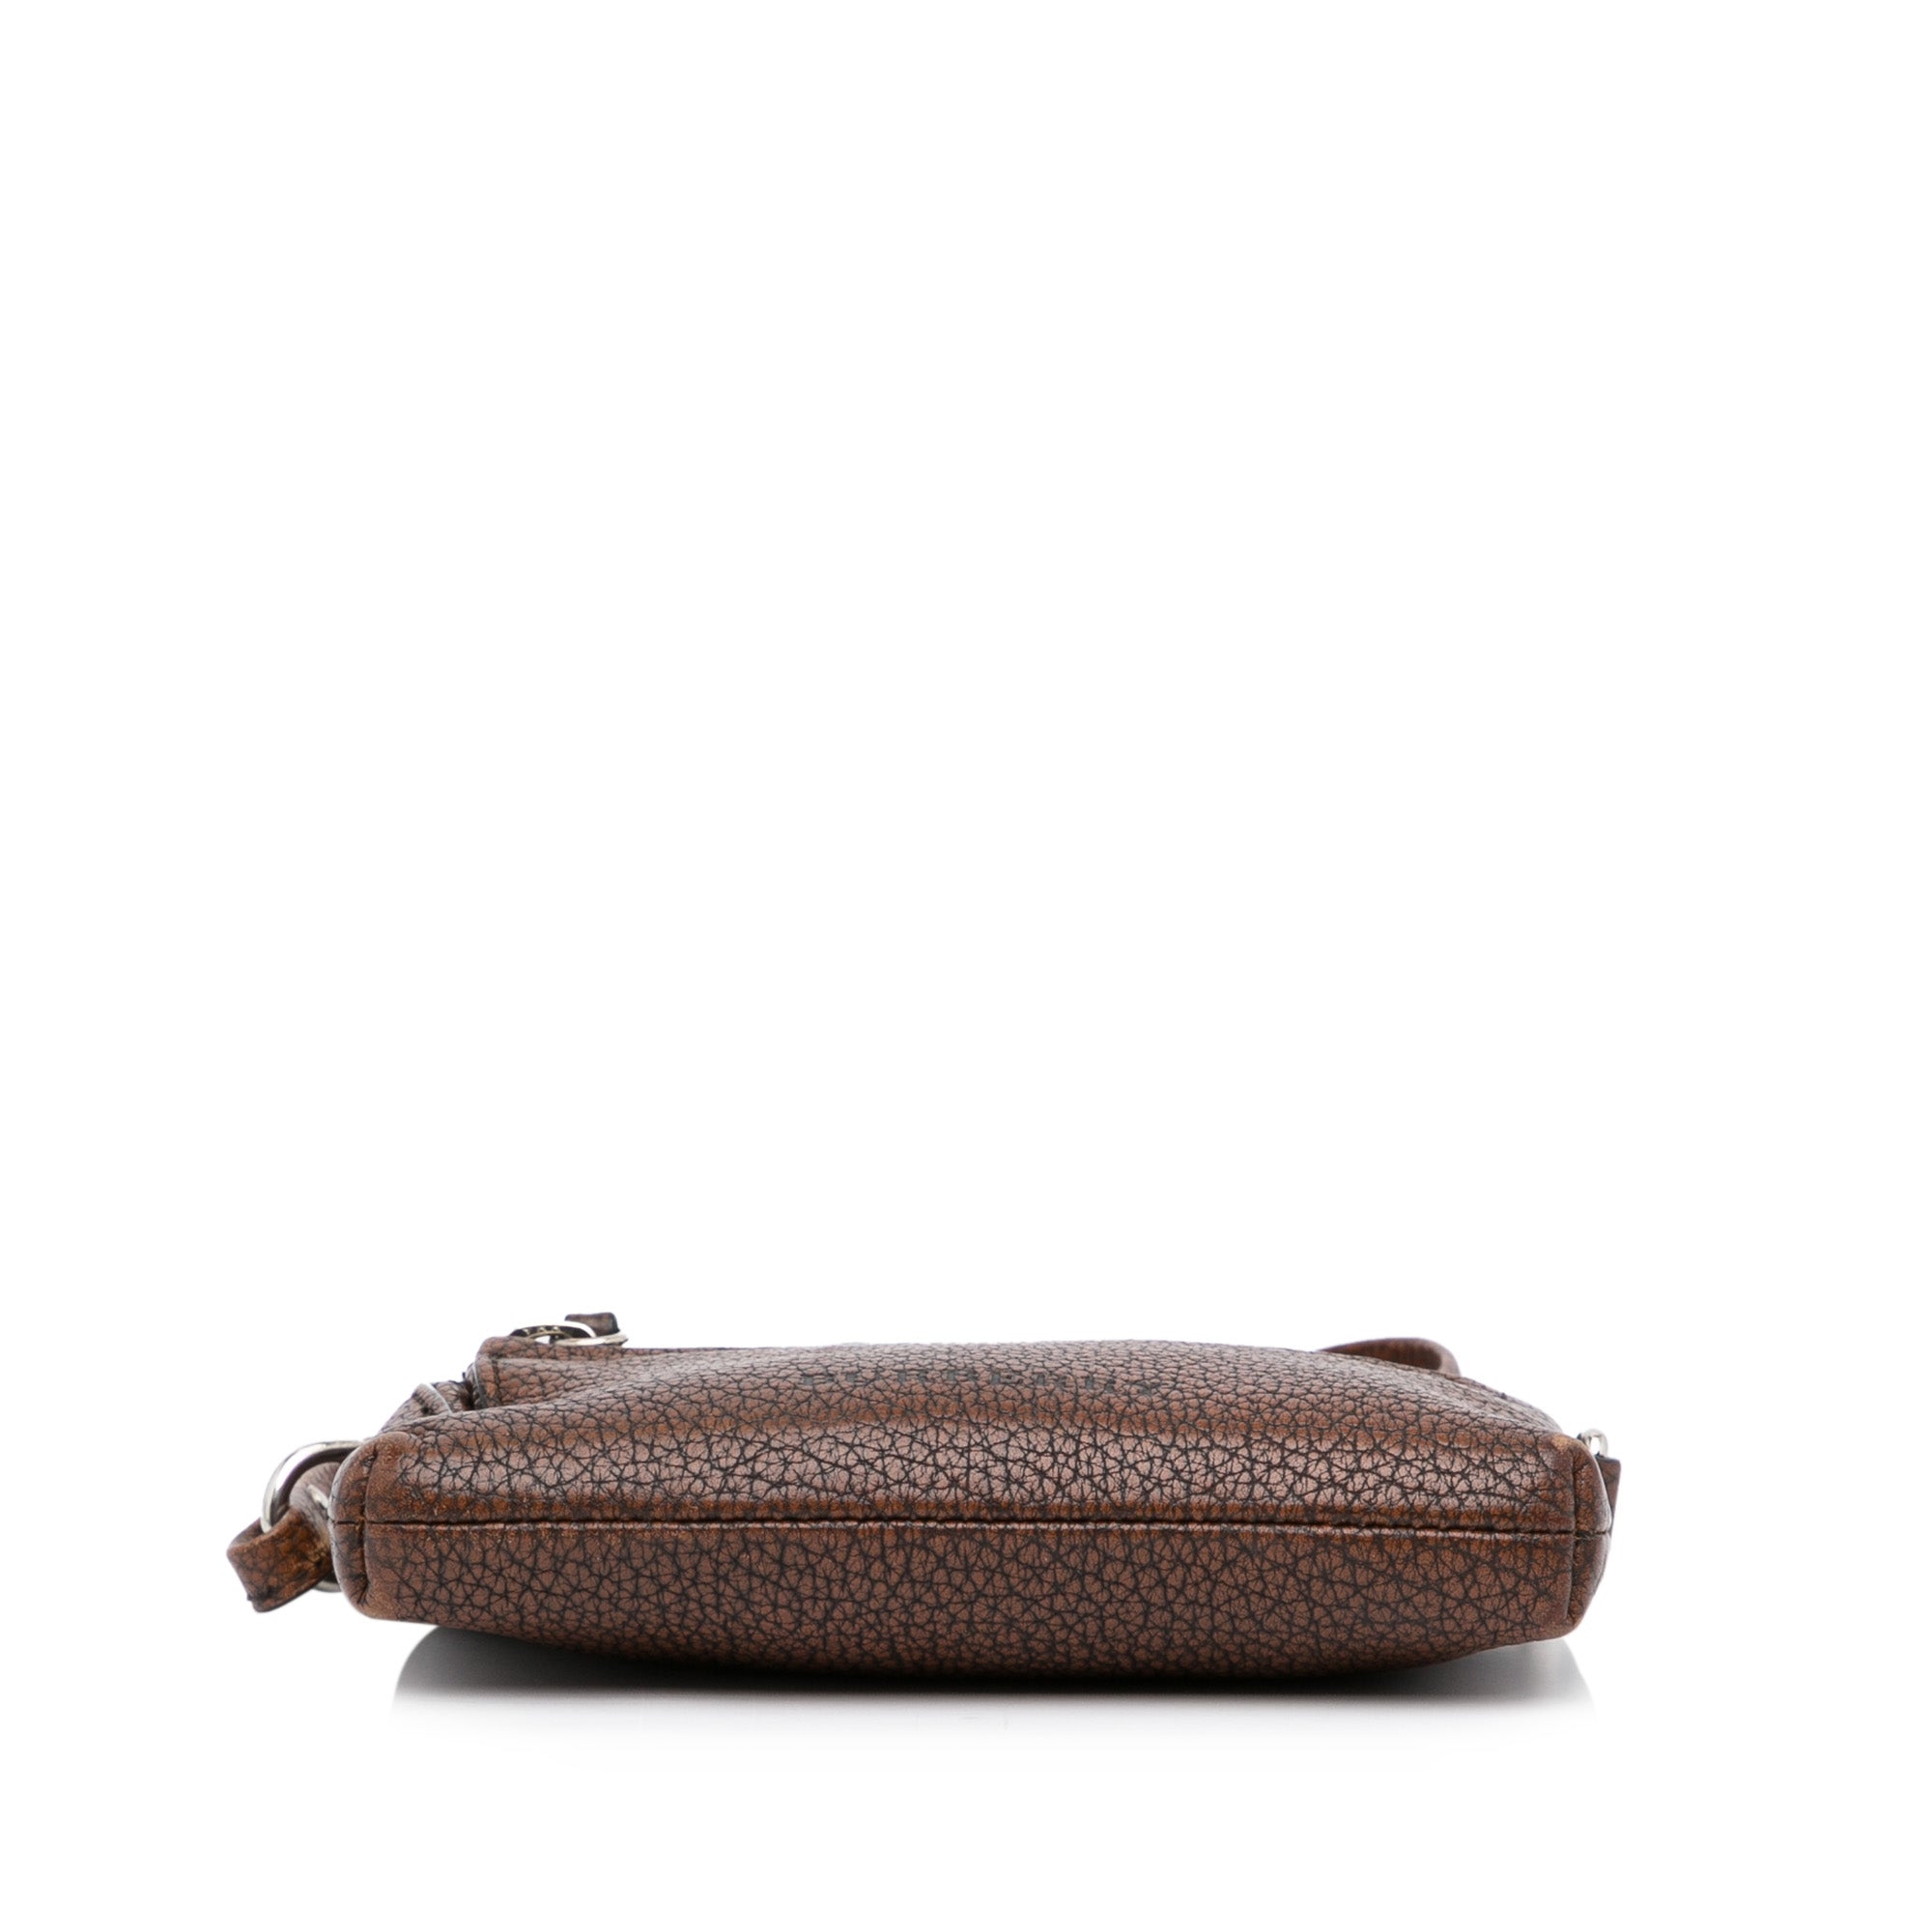 Brown Burberry Leather Crossbody Bag, RvceShops Revival